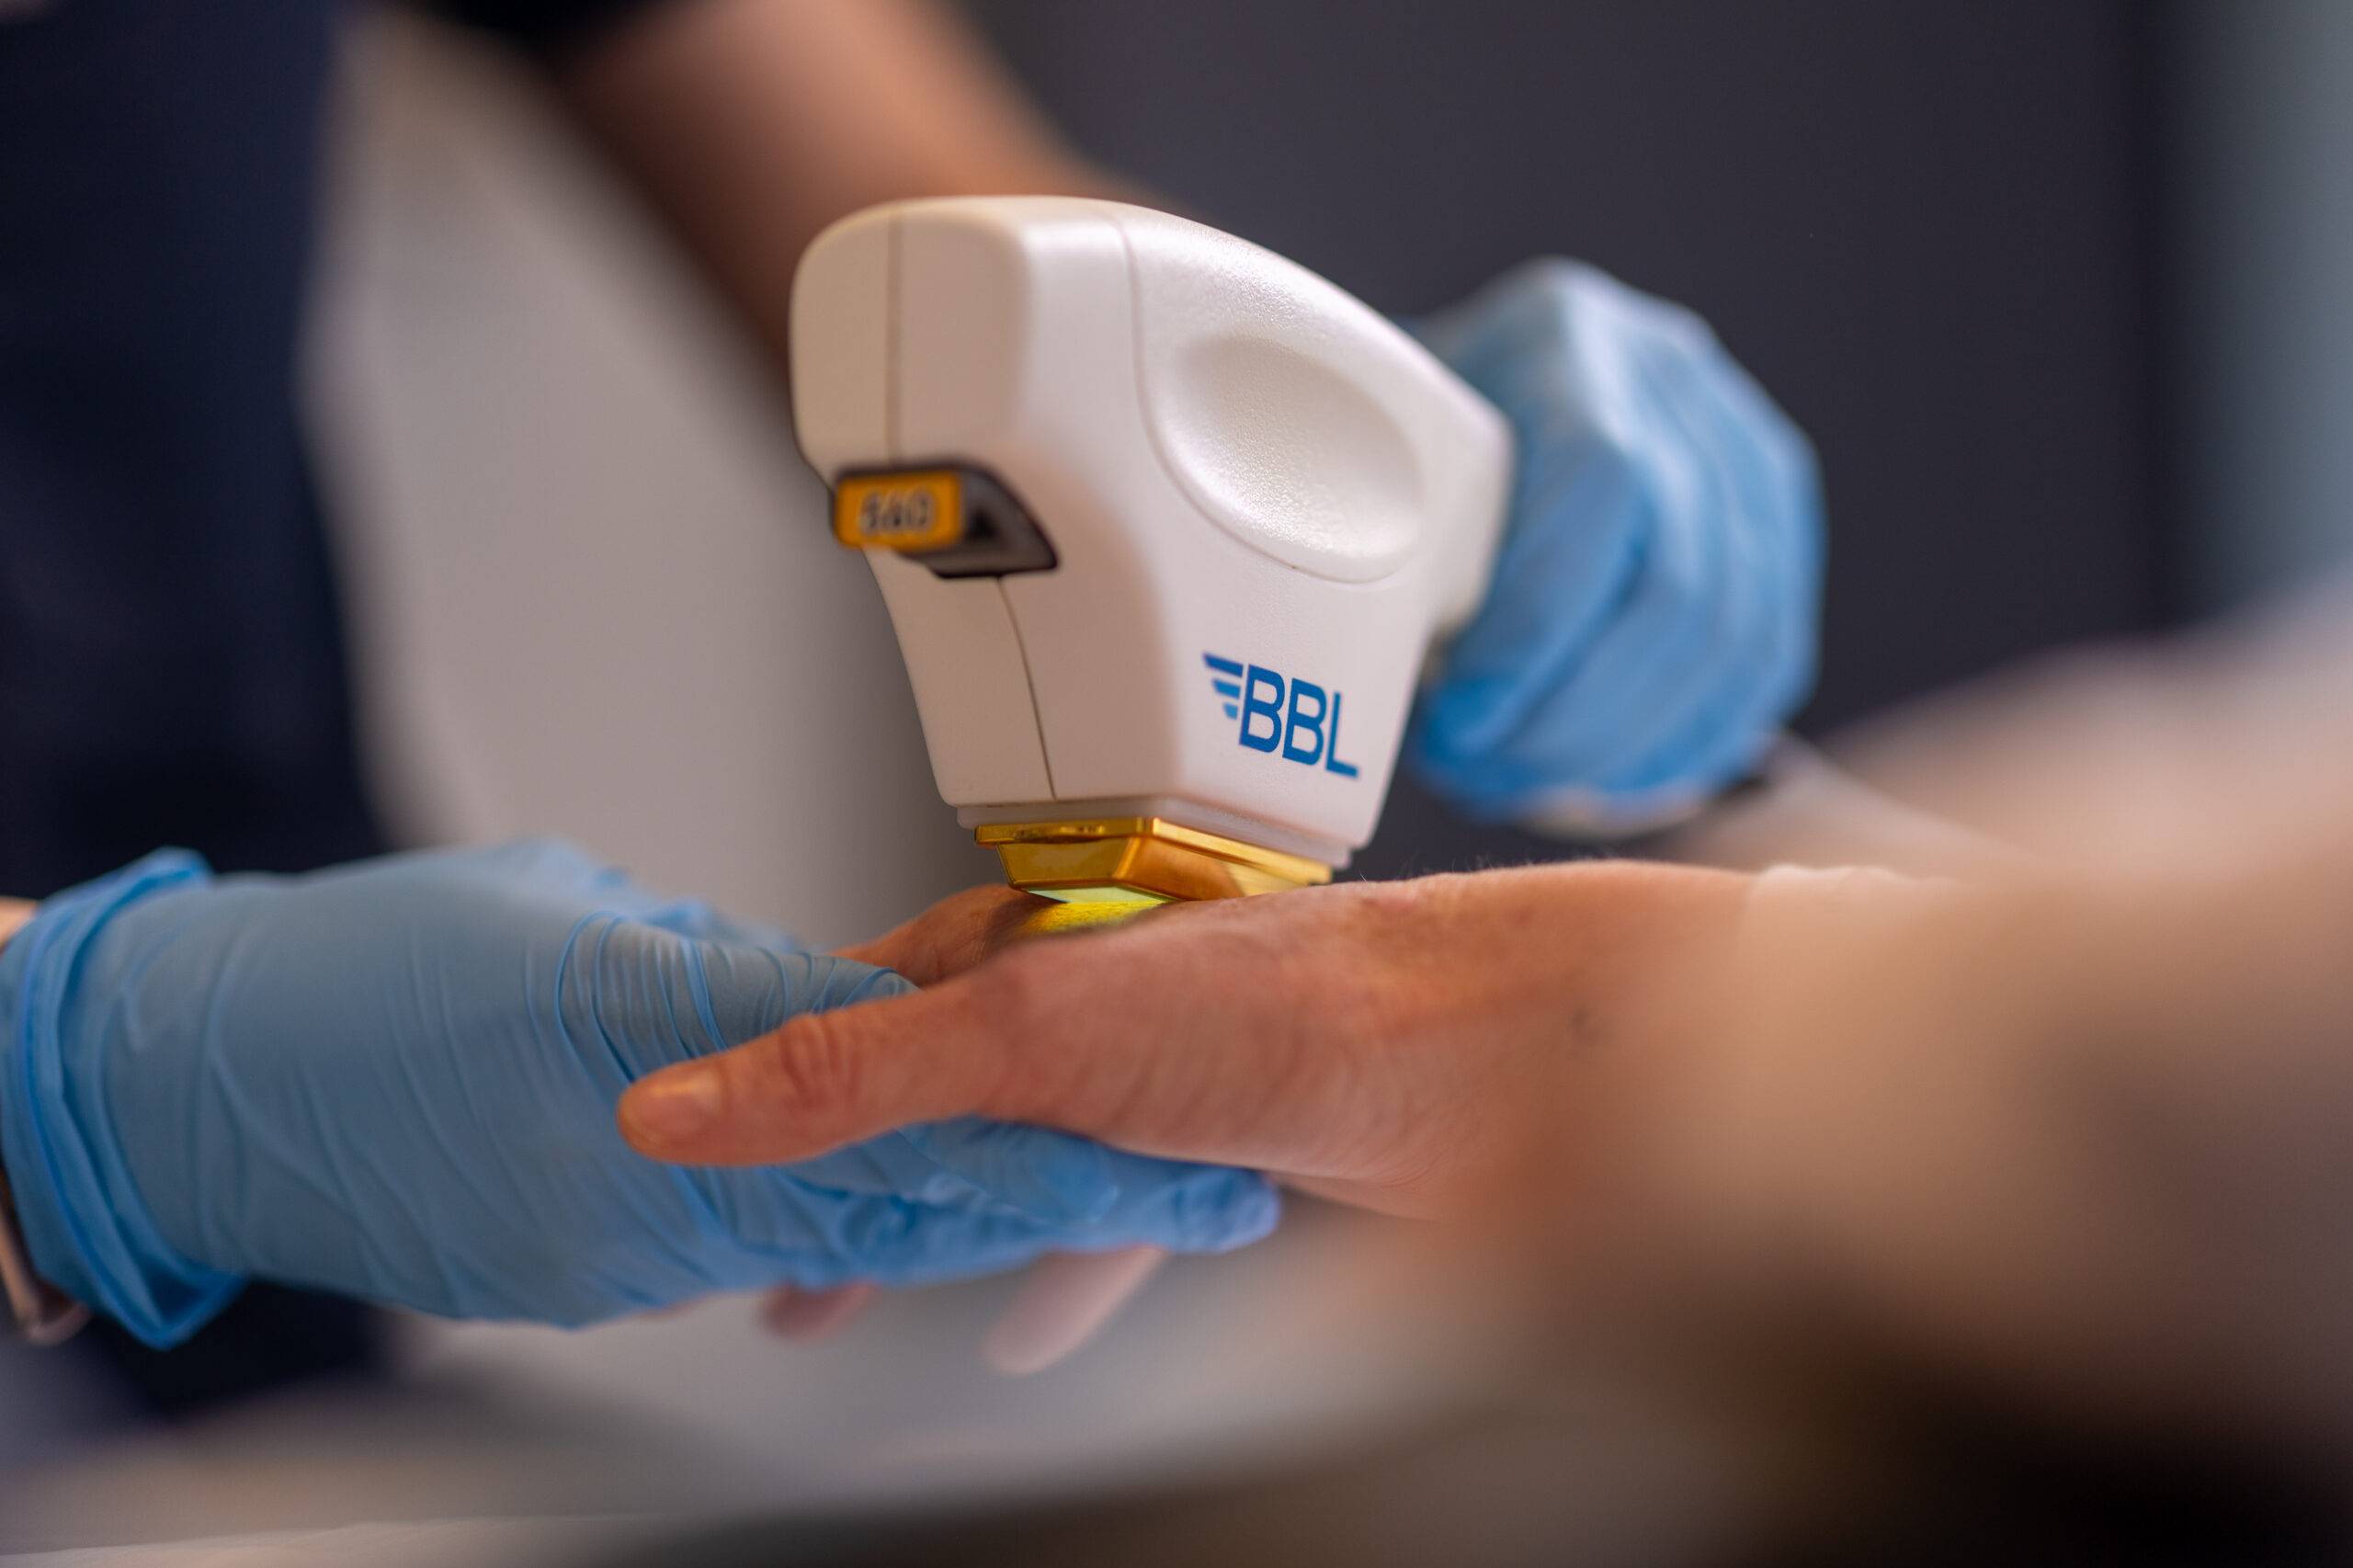 A healthcare professional in blue gloves uses a handheld bbl device for hand rejuvenation on a patient's hand during a medical examination.